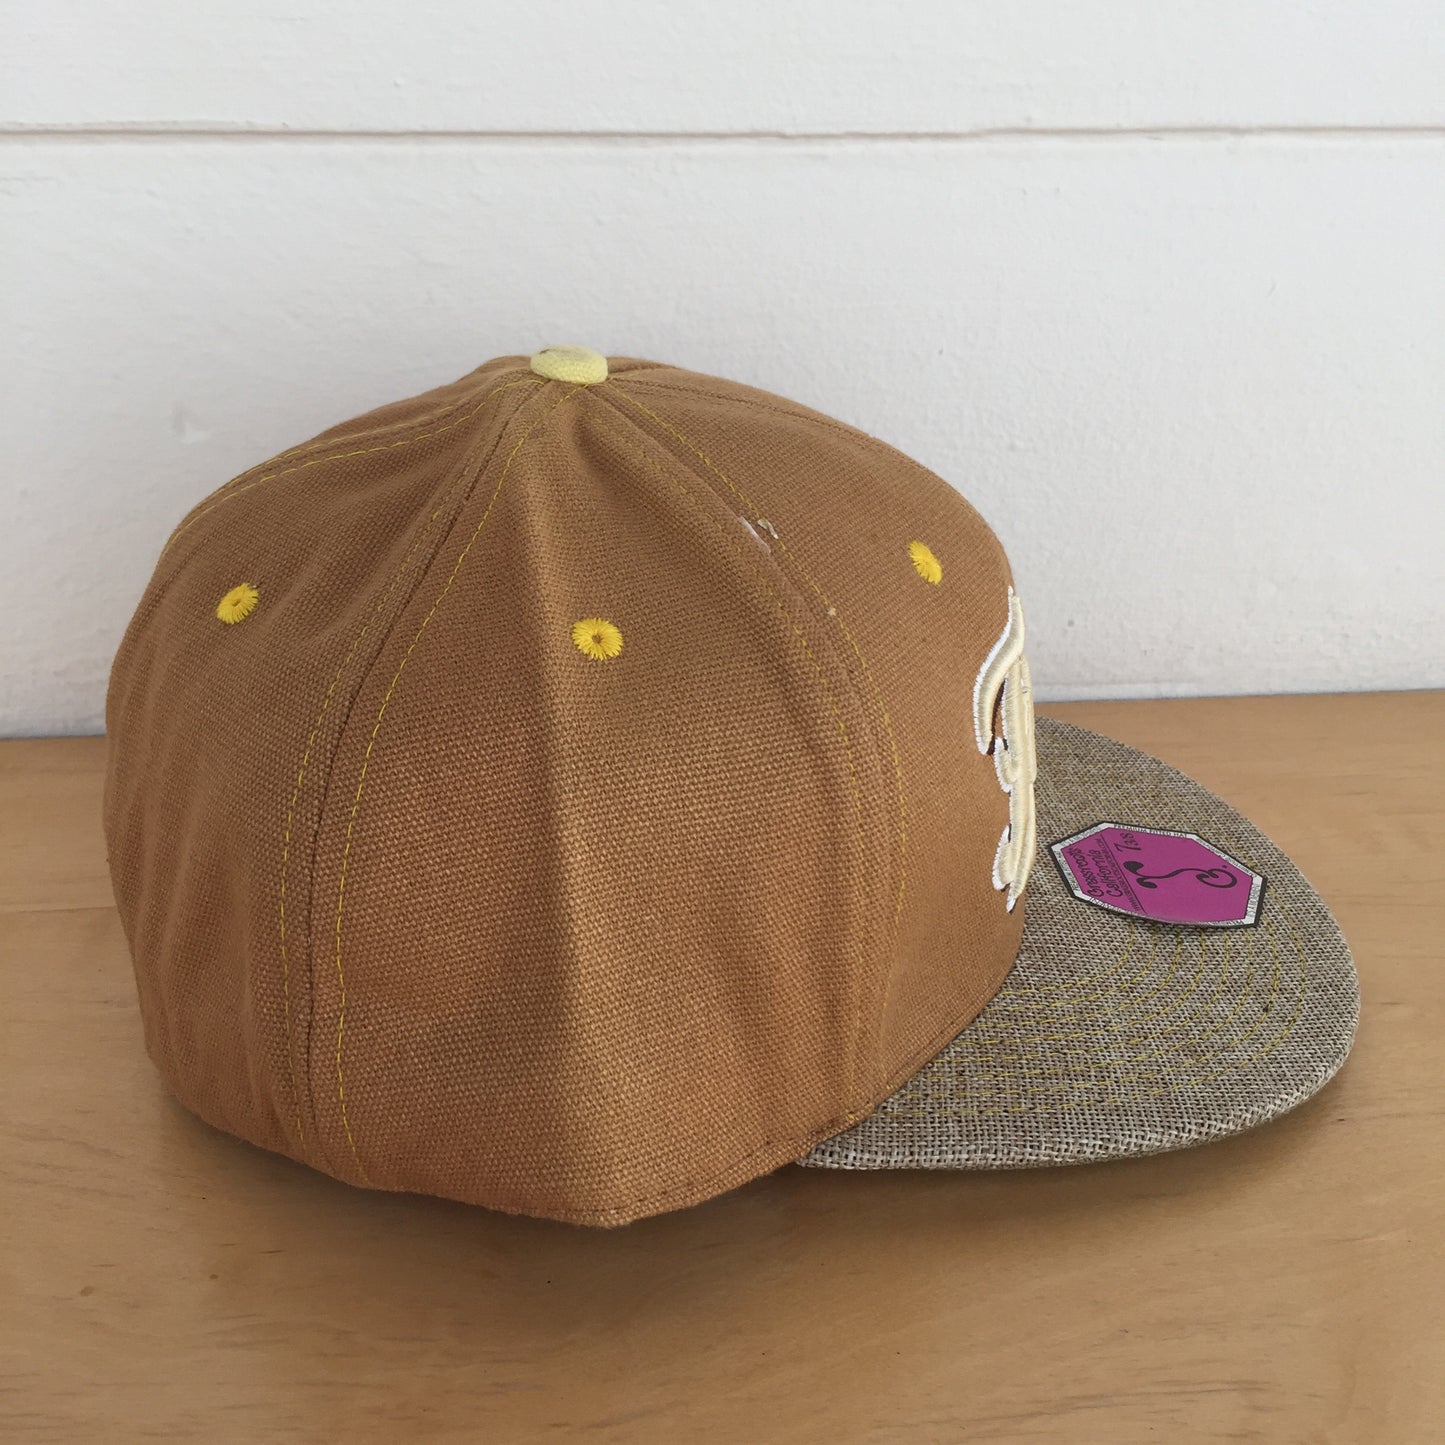 Grassroots X Del Fitted 'FUNK' Hat - Straw/Gold